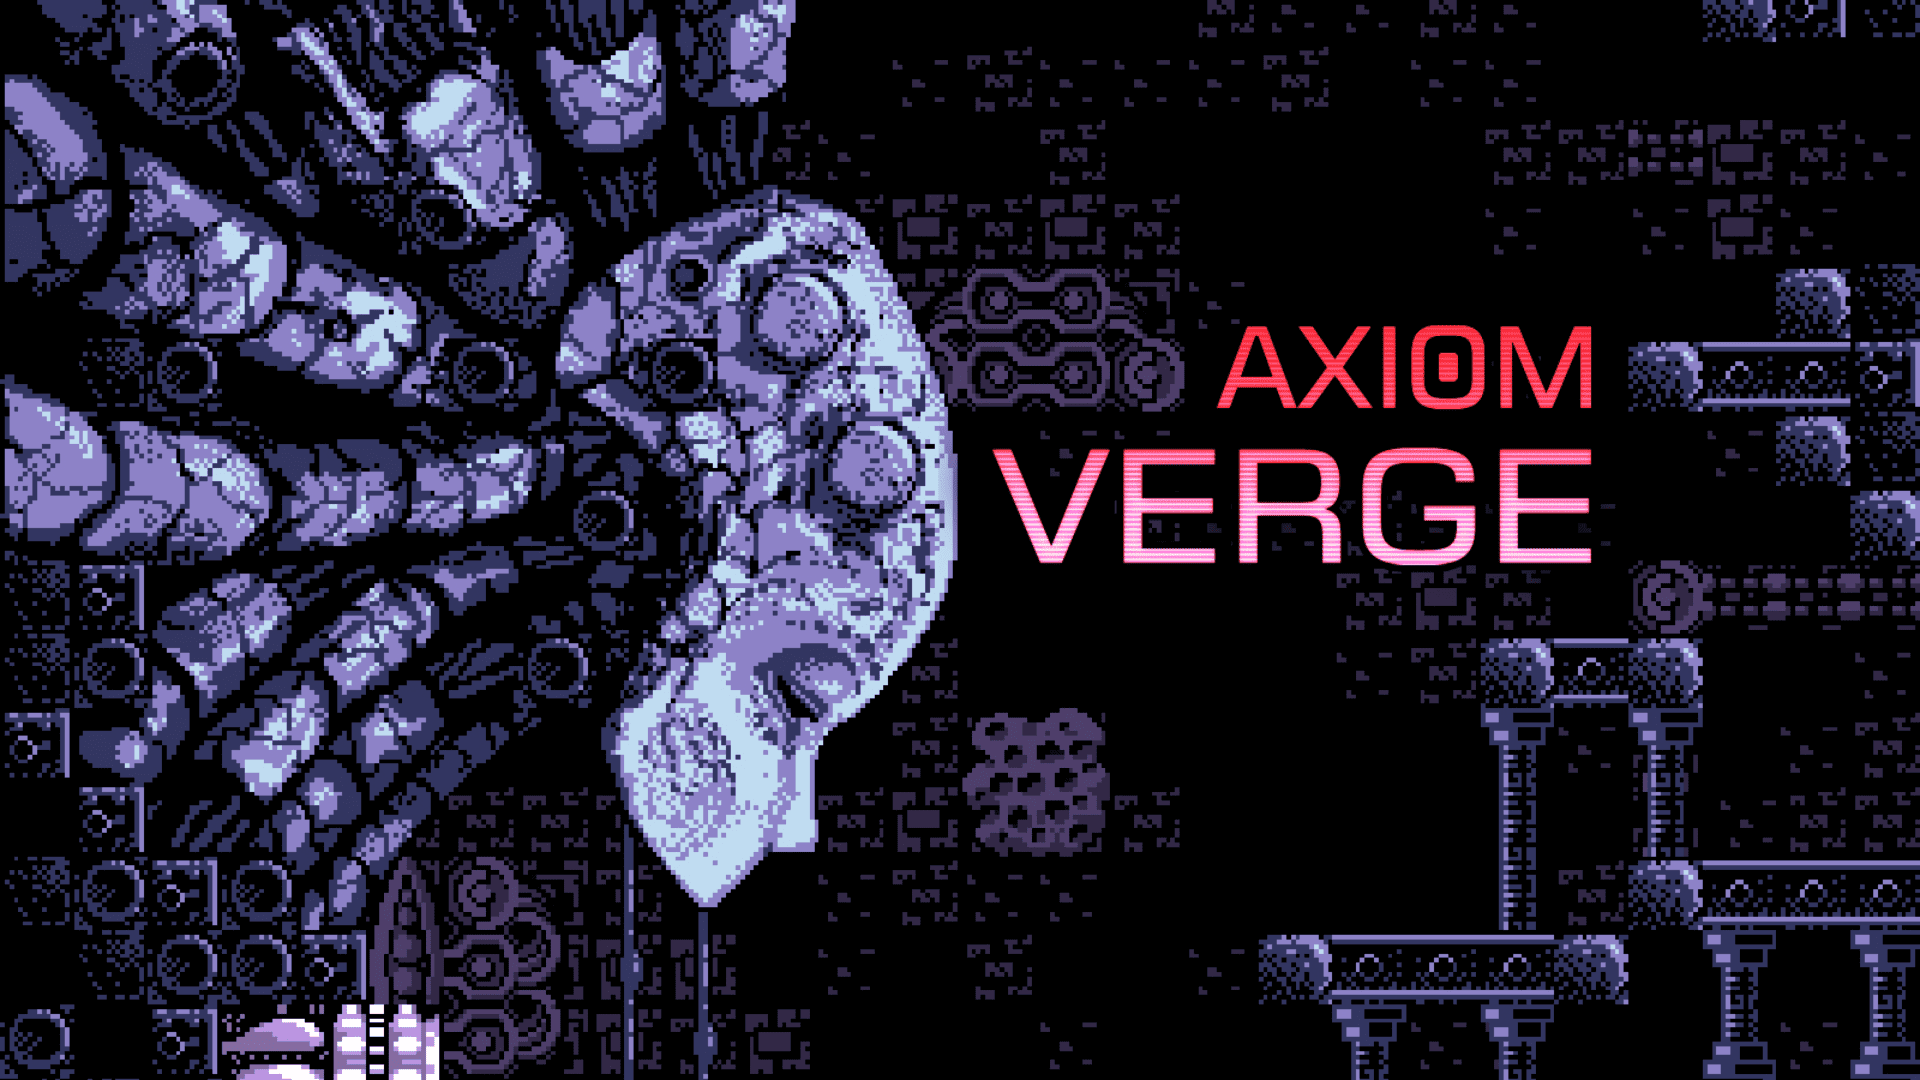 Axiom Verge Announced for Xbox One and Wii U